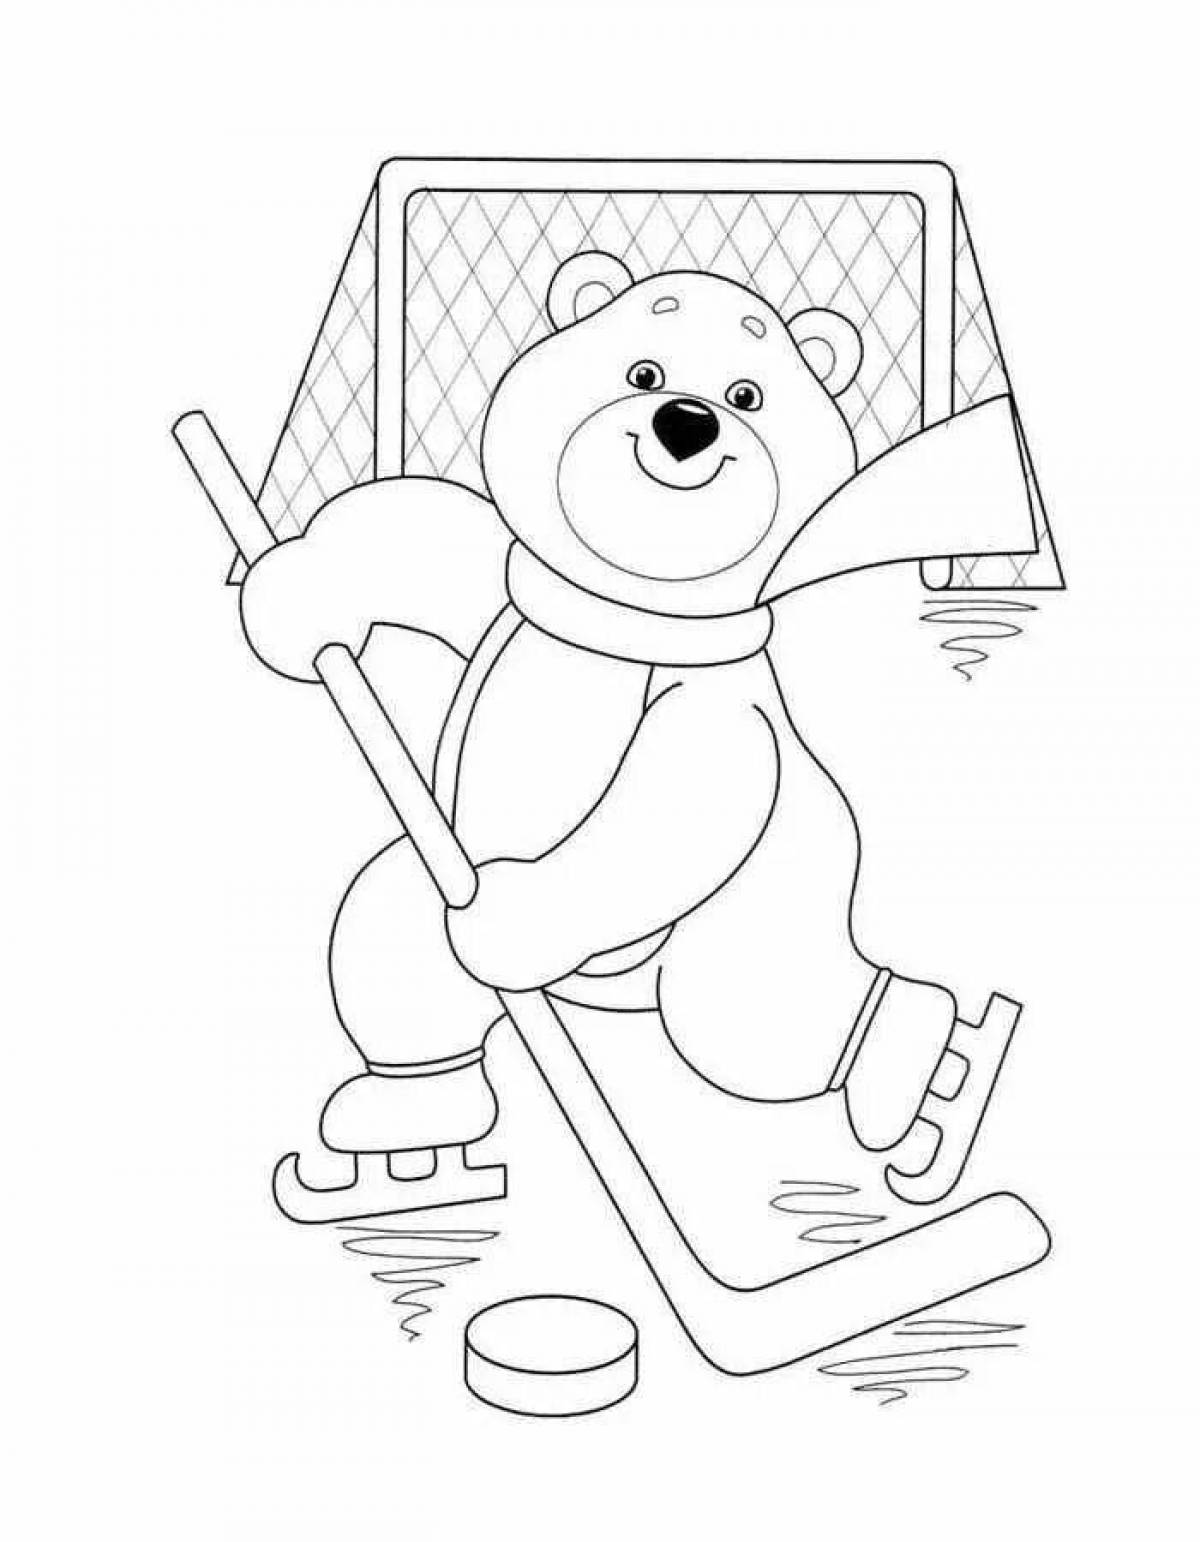 Olympic winter sports glitter coloring